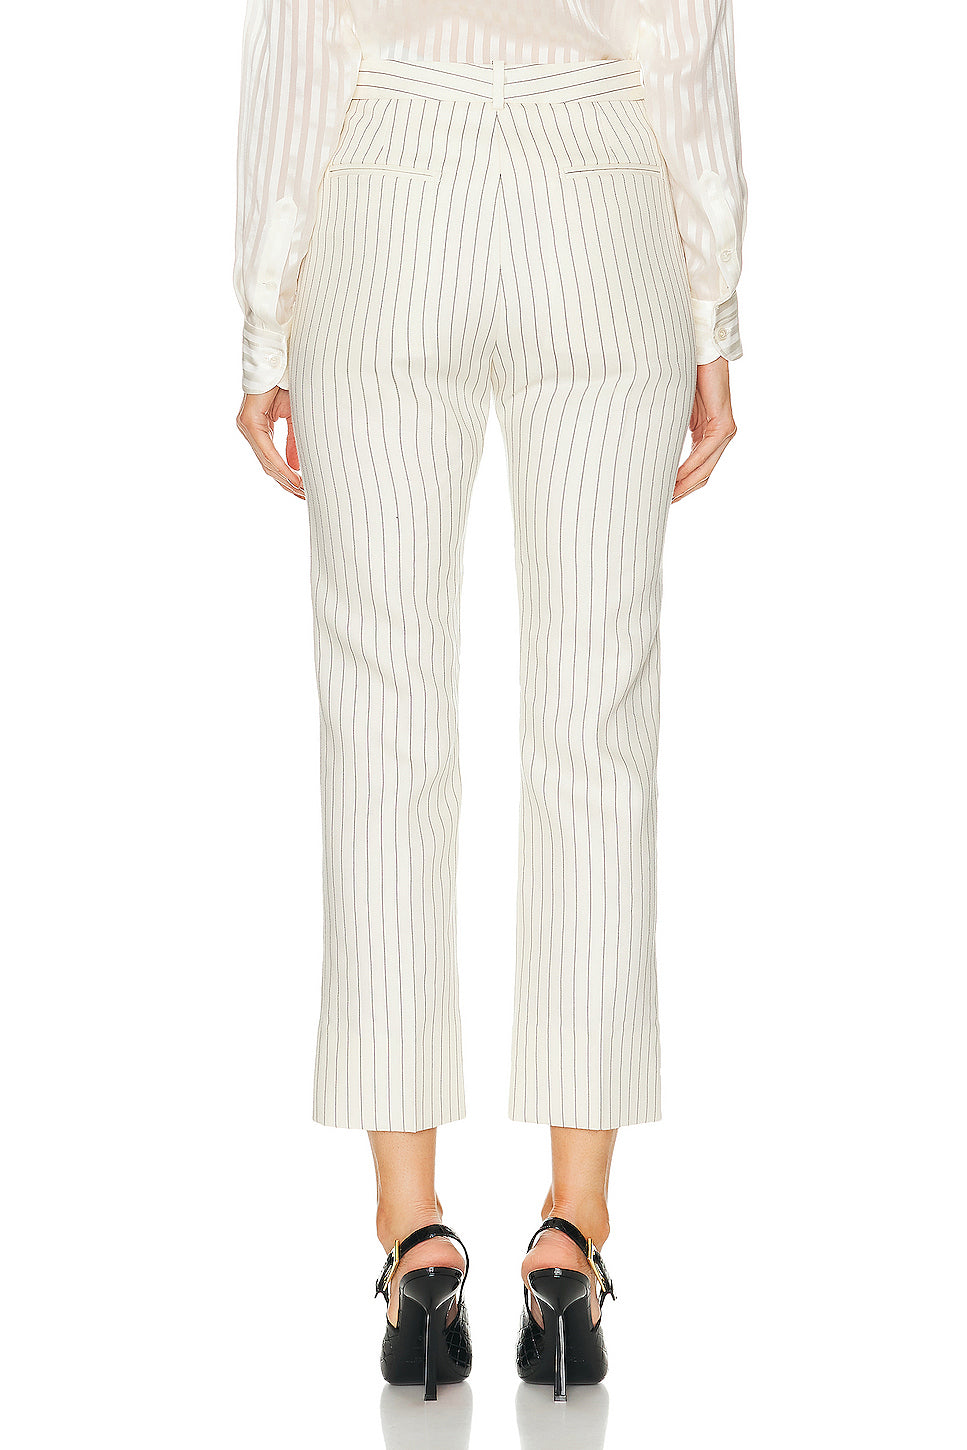 Striped Tailored Pant